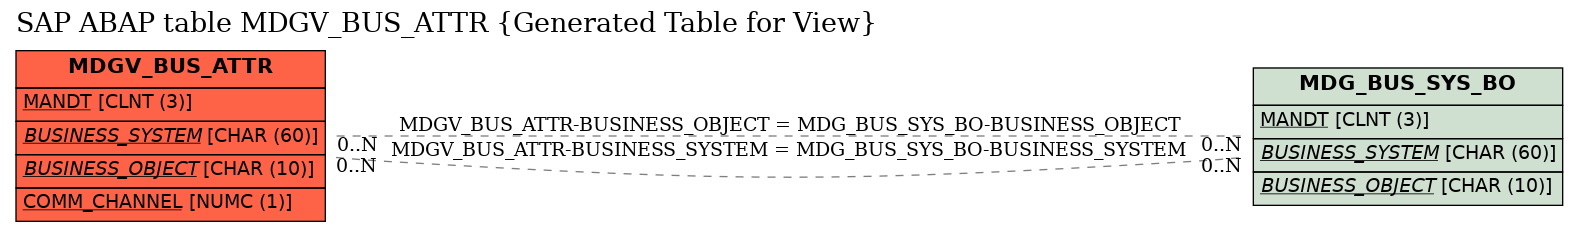 E-R Diagram for table MDGV_BUS_ATTR (Generated Table for View)